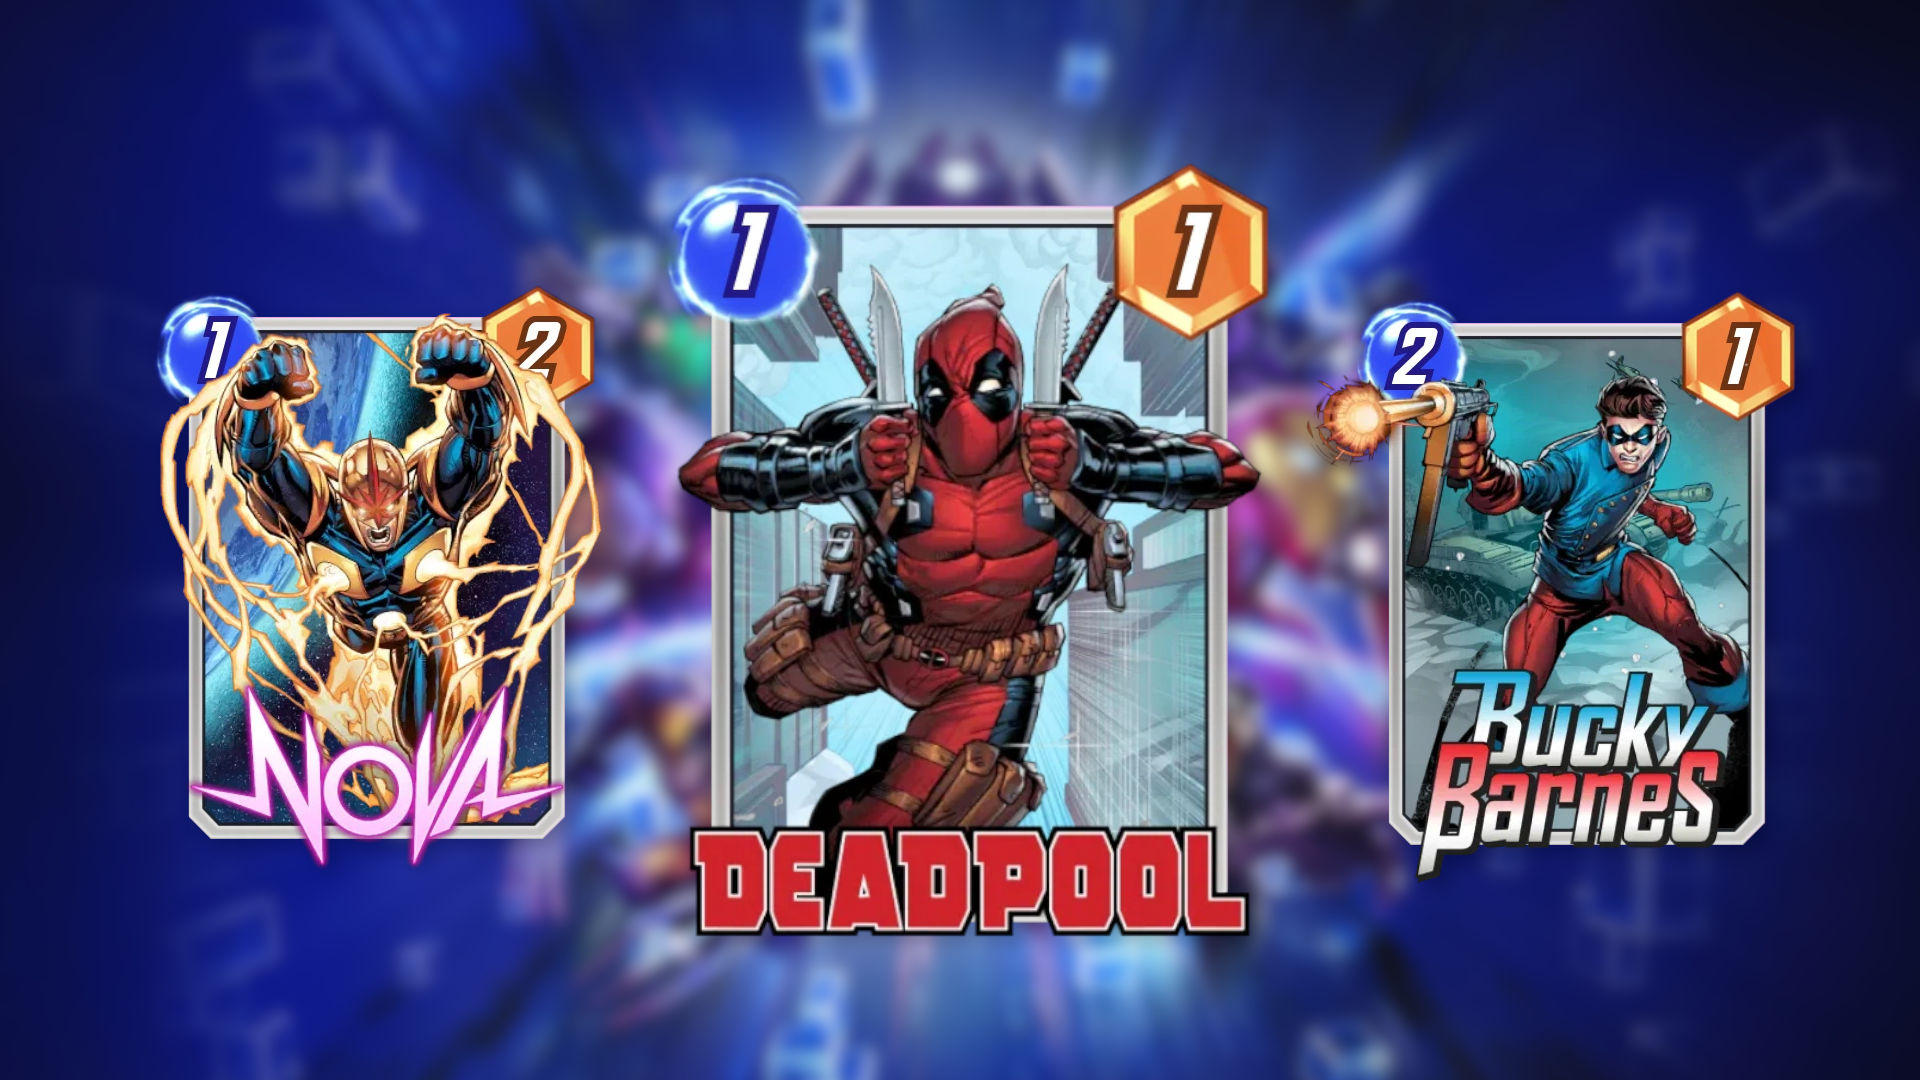 Best Marvel Snap Decks You Have to Try